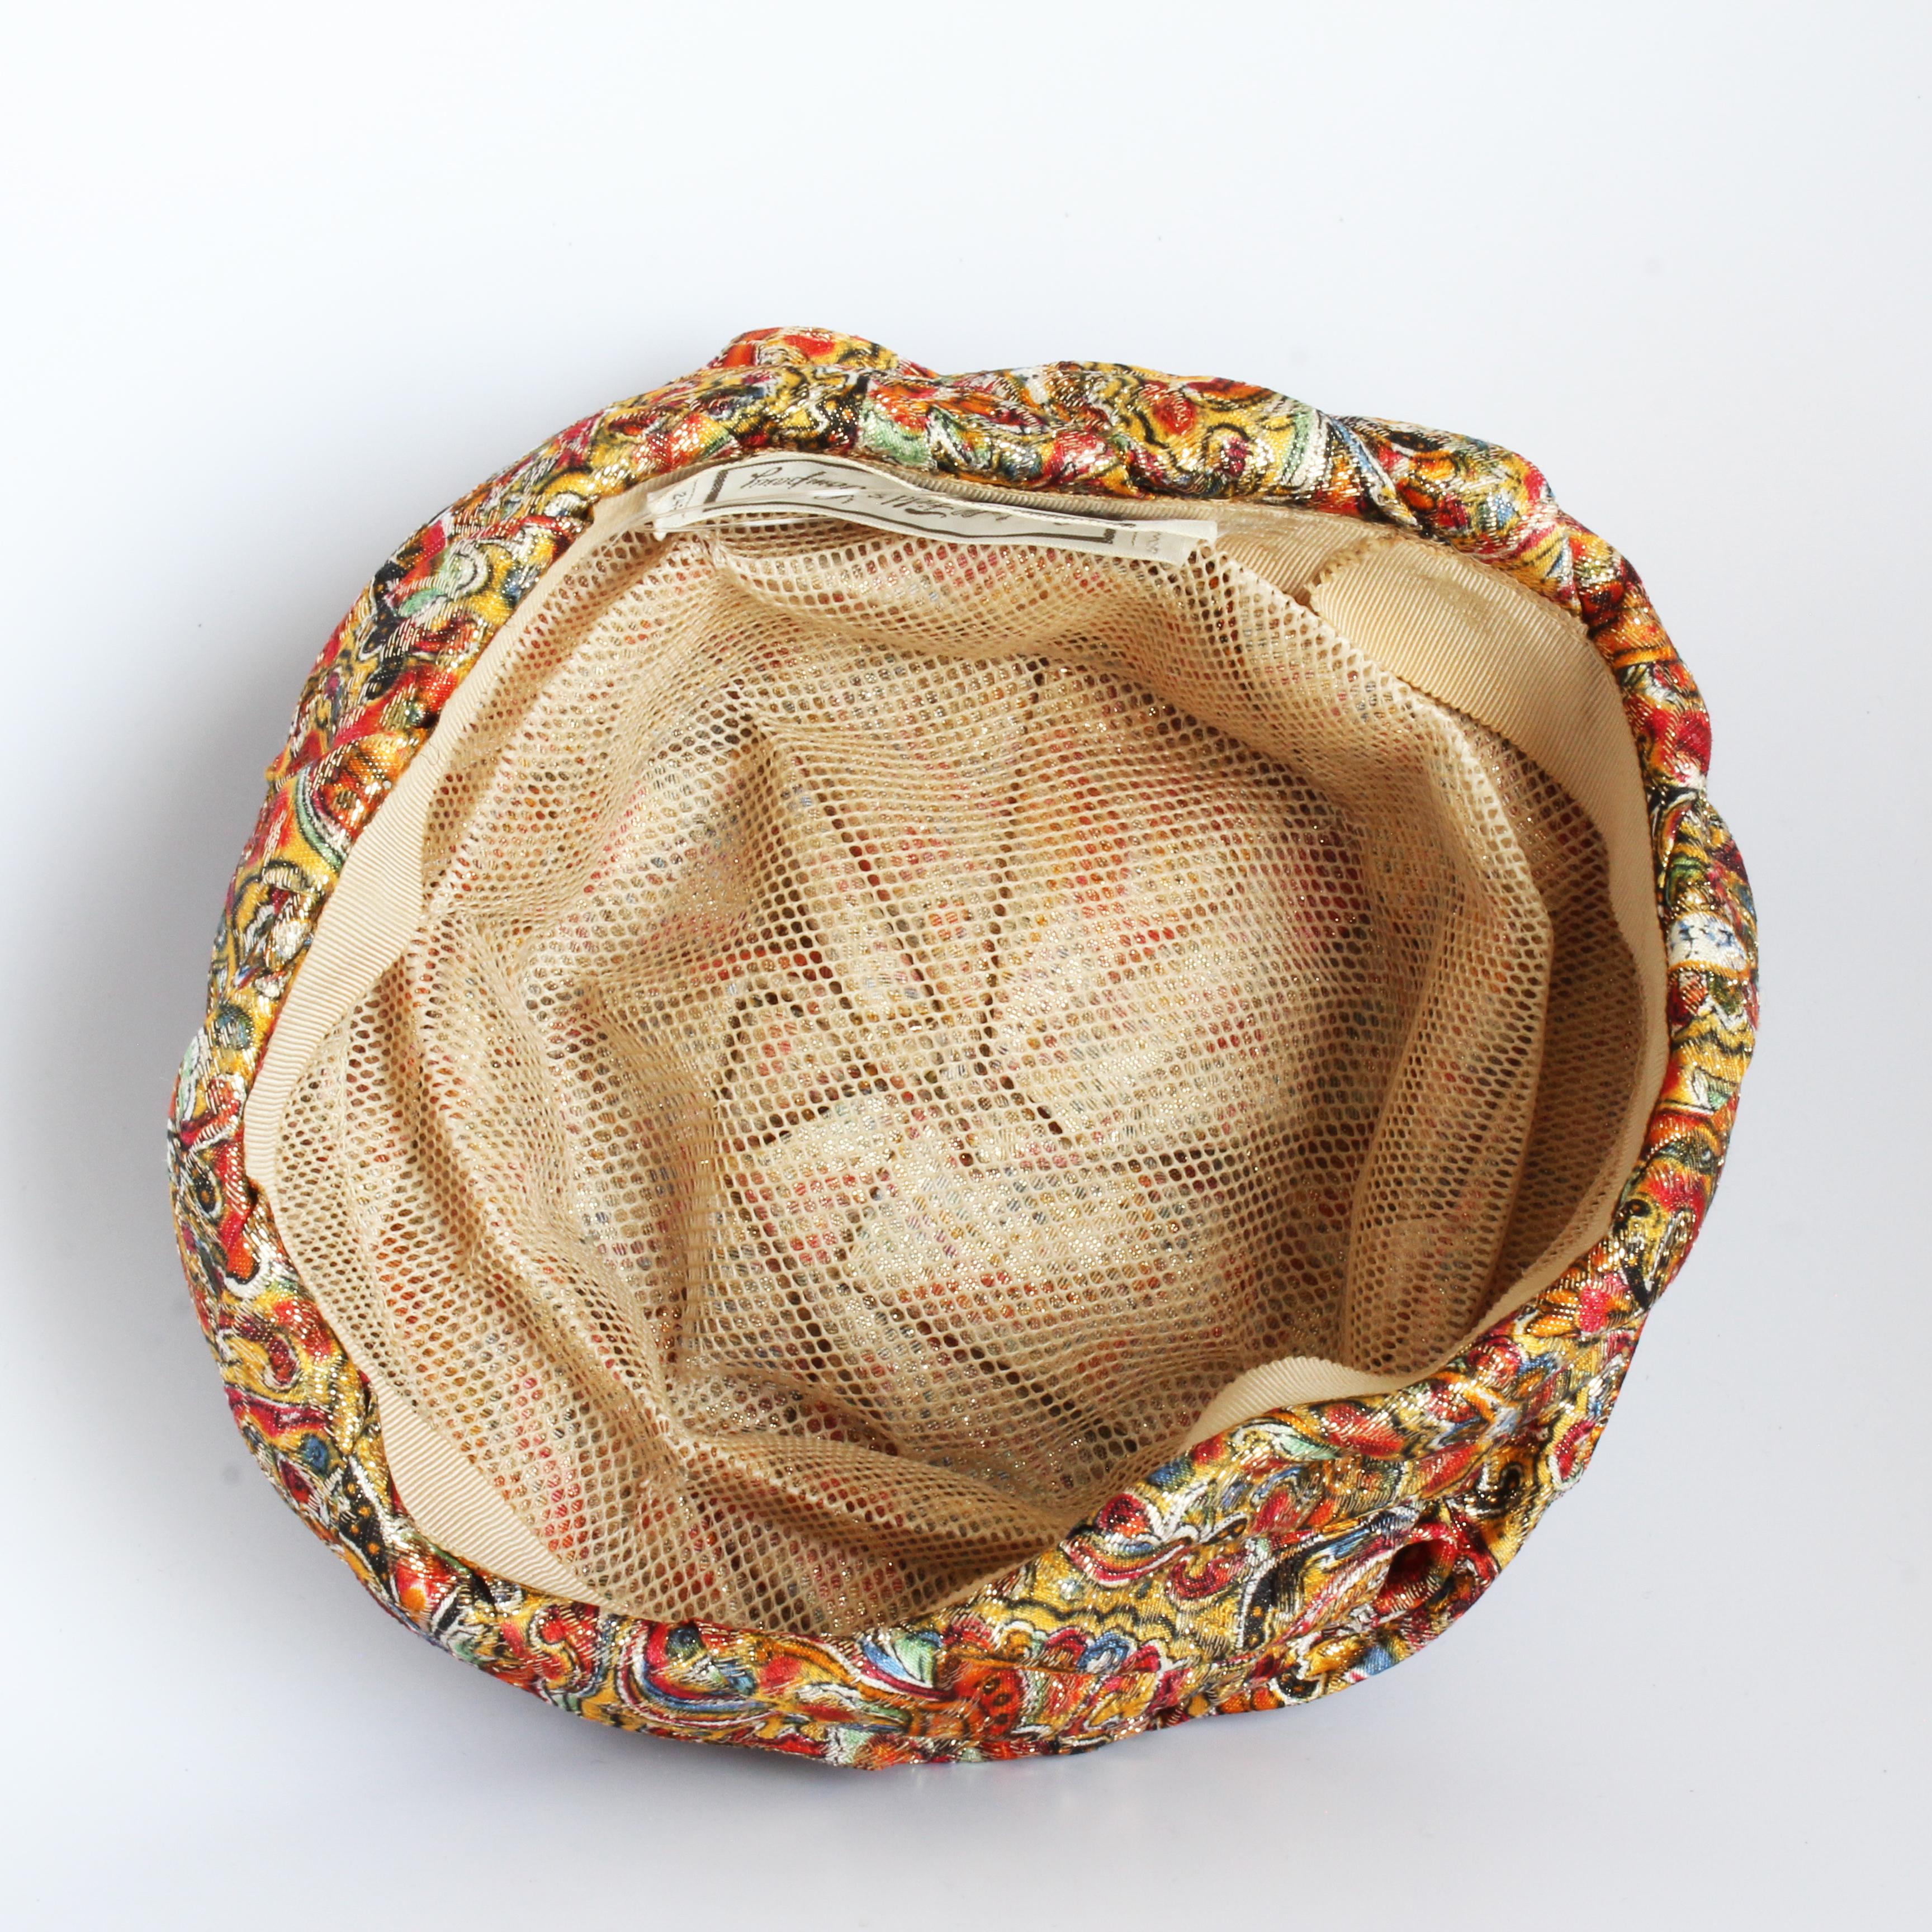 1950s Turban Hat Metallic Paisley Colorful by Marshall Field & Company Rare  For Sale 5